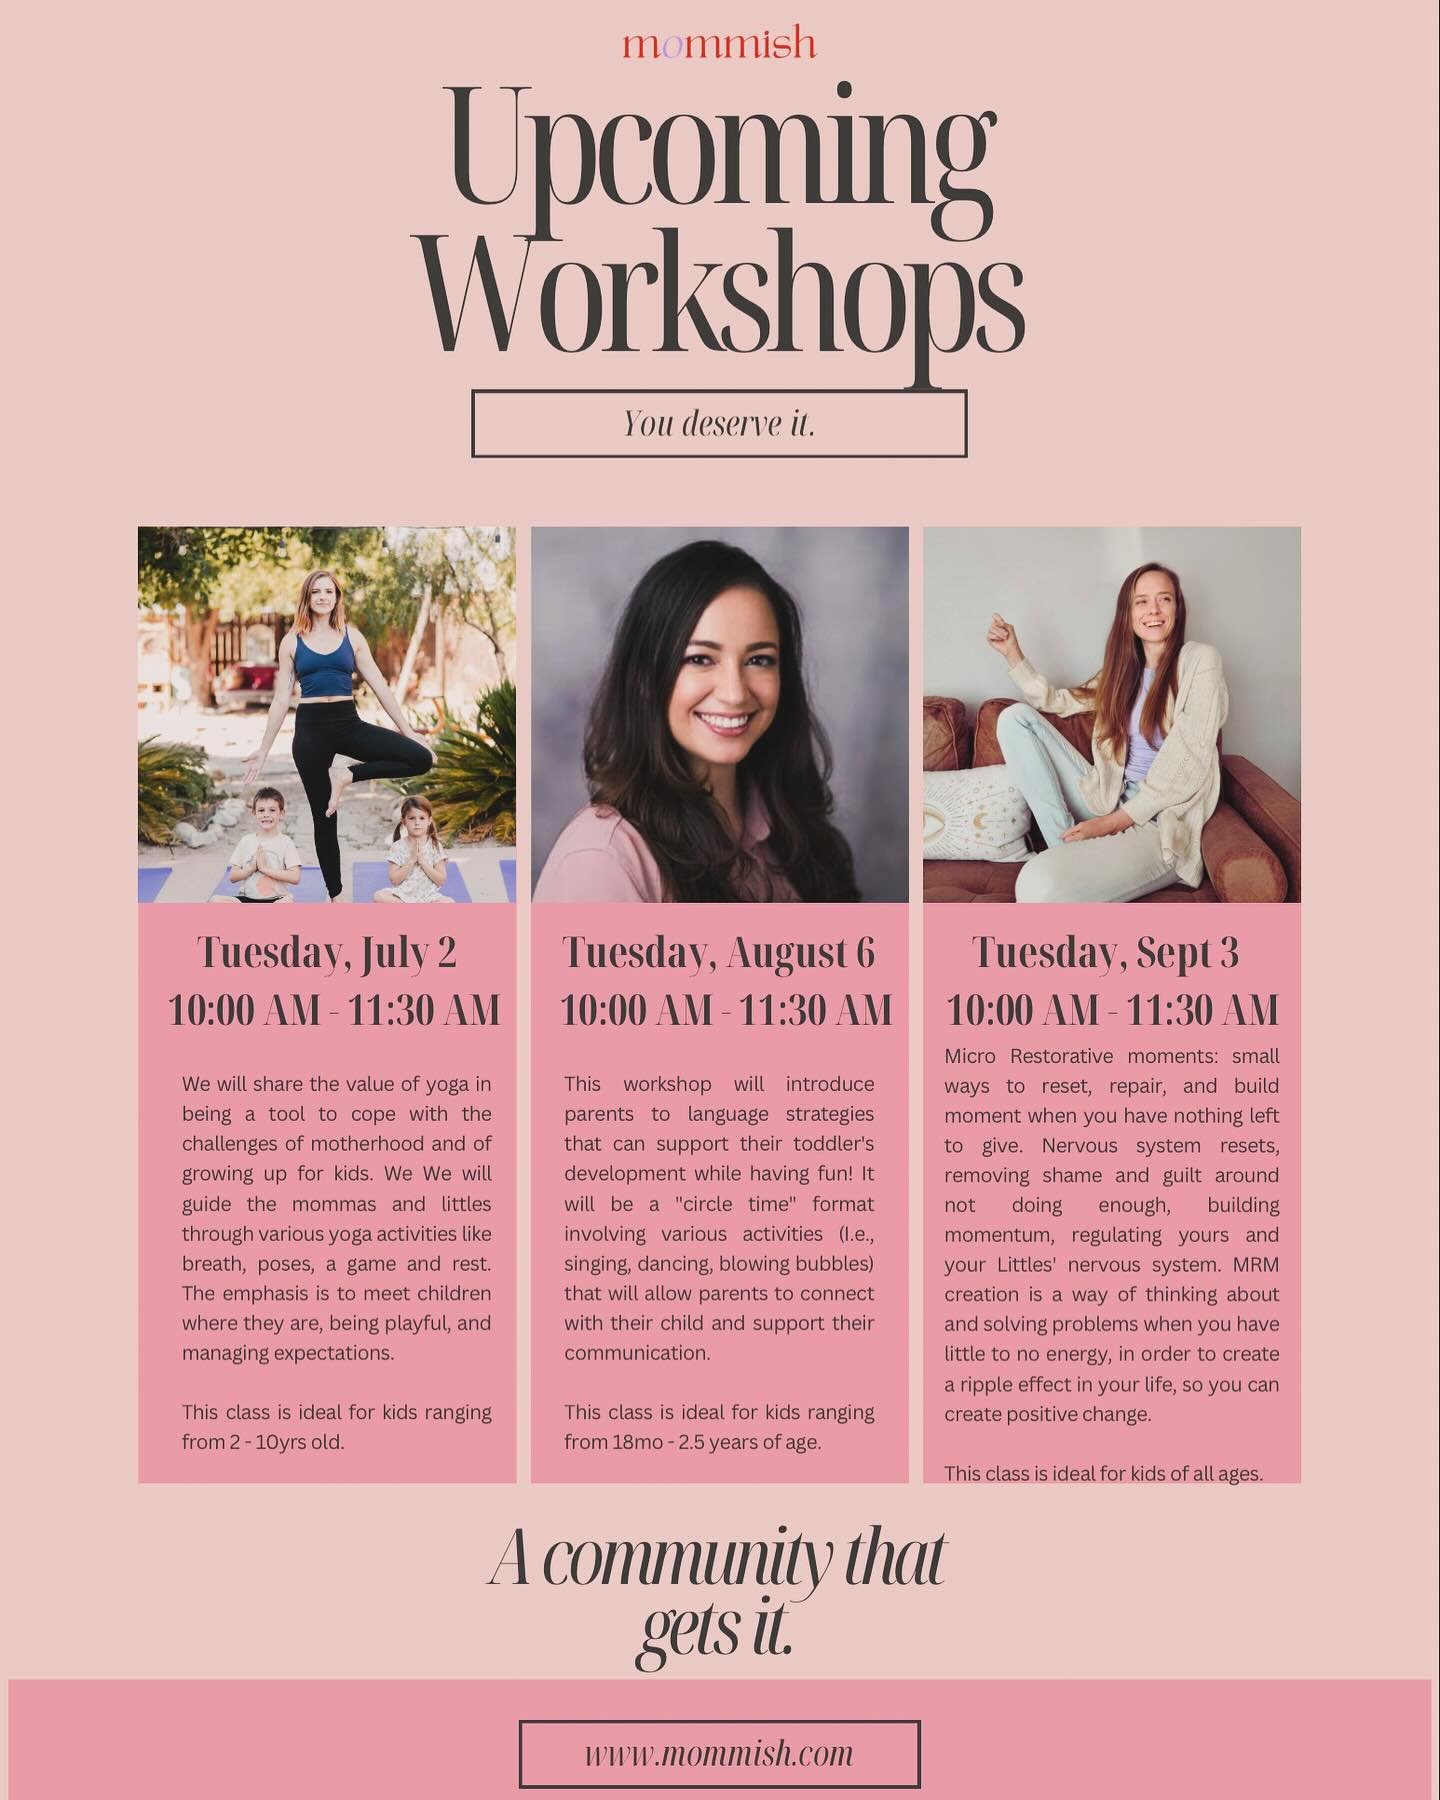 We&rsquo;re excited to announce our first 3 upcoming workshops! Workshops will be held the first Tuesday of every month and are open to all! Members receive 50% off! See you there 💕